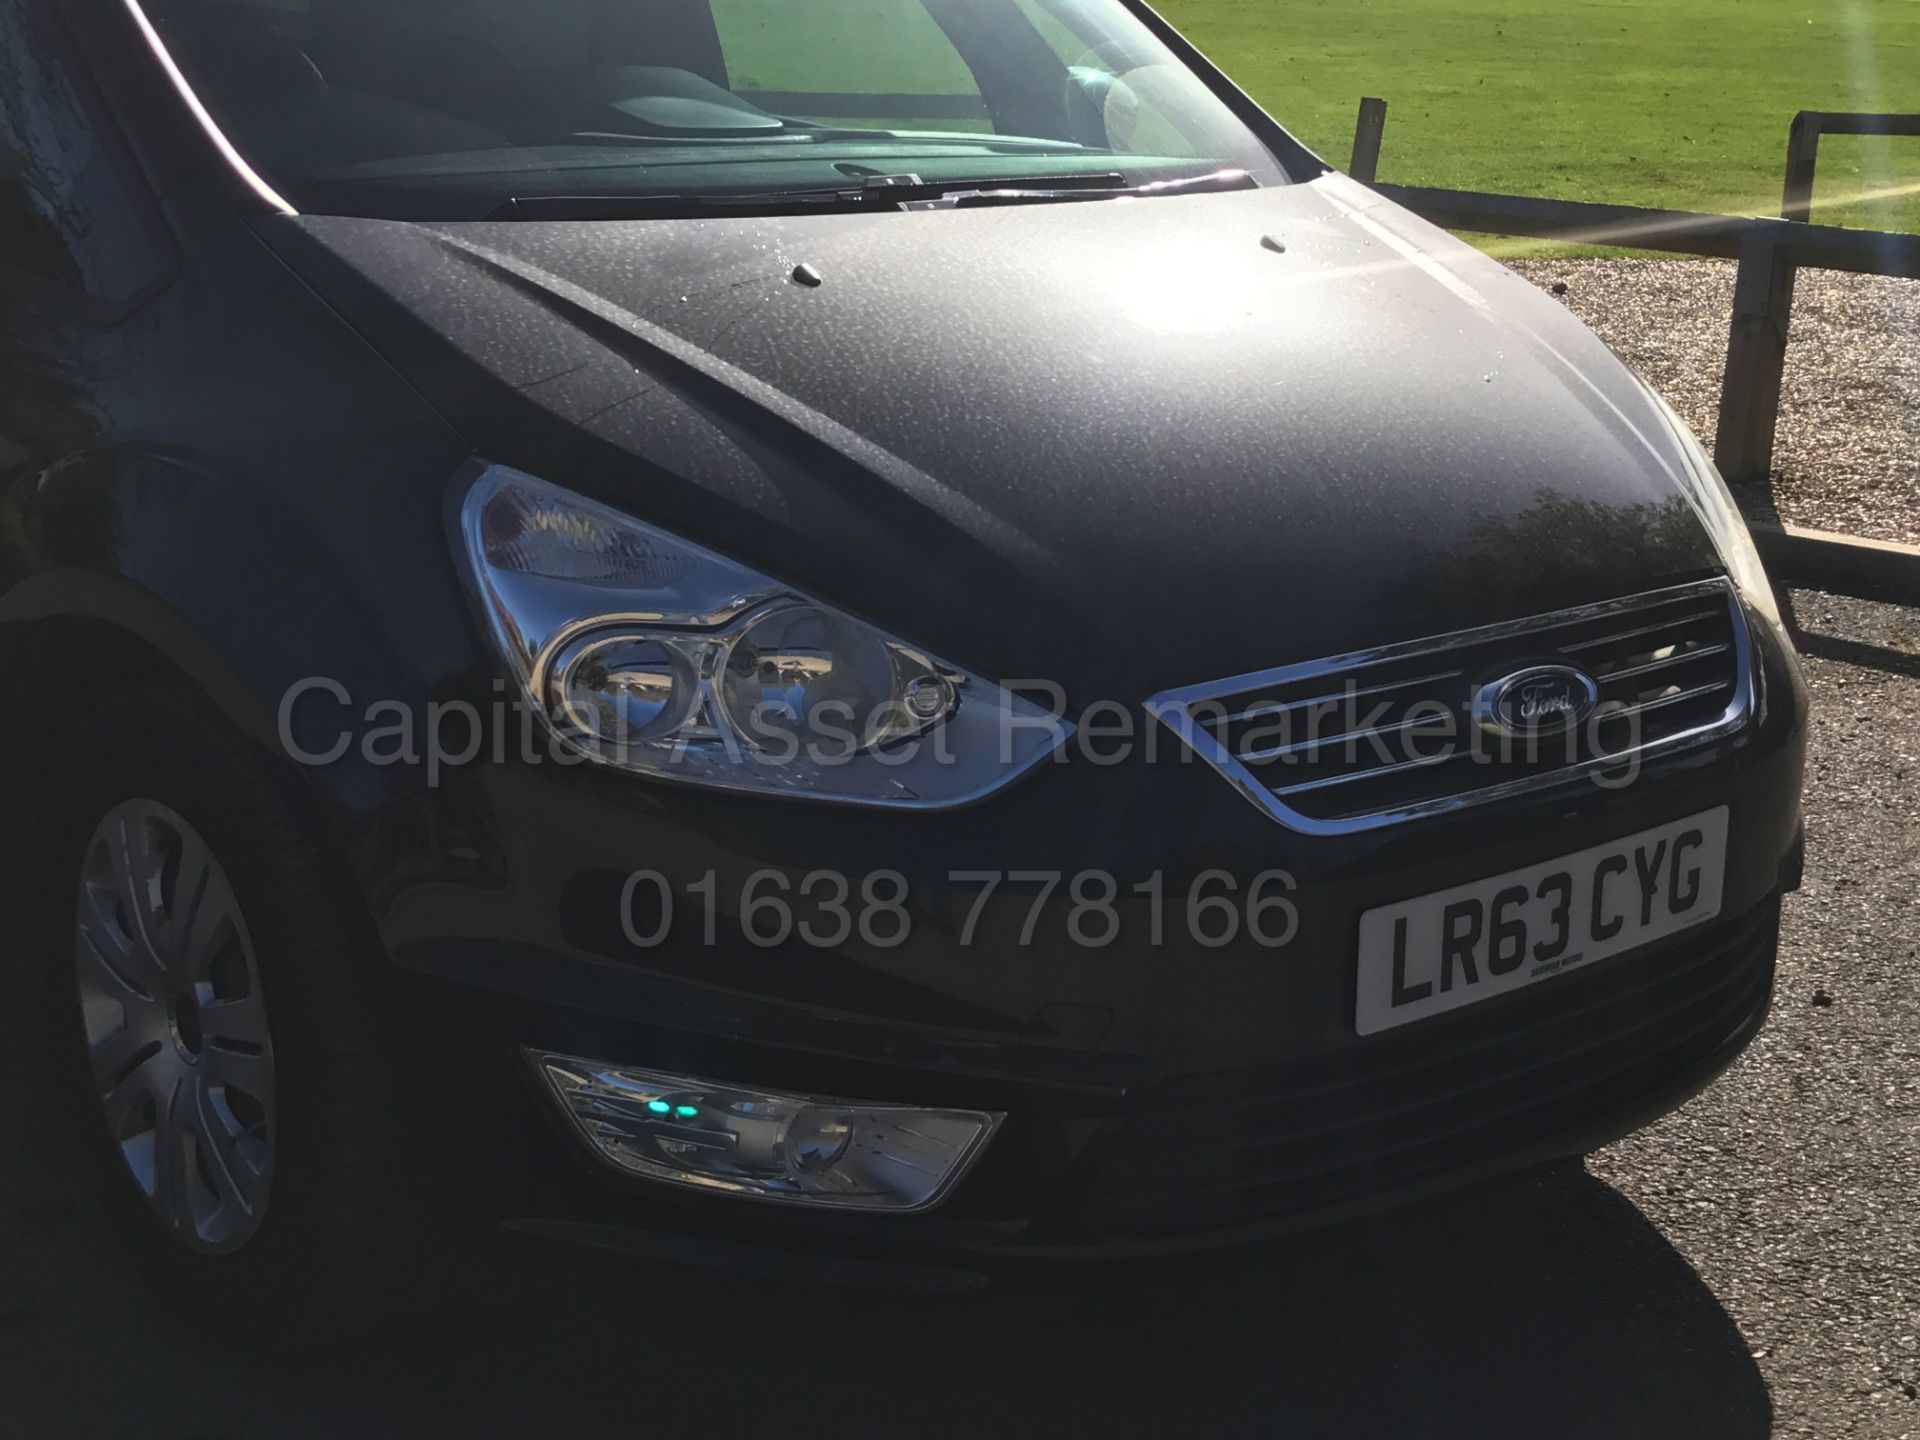 (ON SALE) FORD GALAXY 'ZETEC' 7 SEATER MPV (2014 MODEL) '2.0 TDCI -140 BHP' (1 OWNER) *FULL HISTORY* - Image 11 of 28